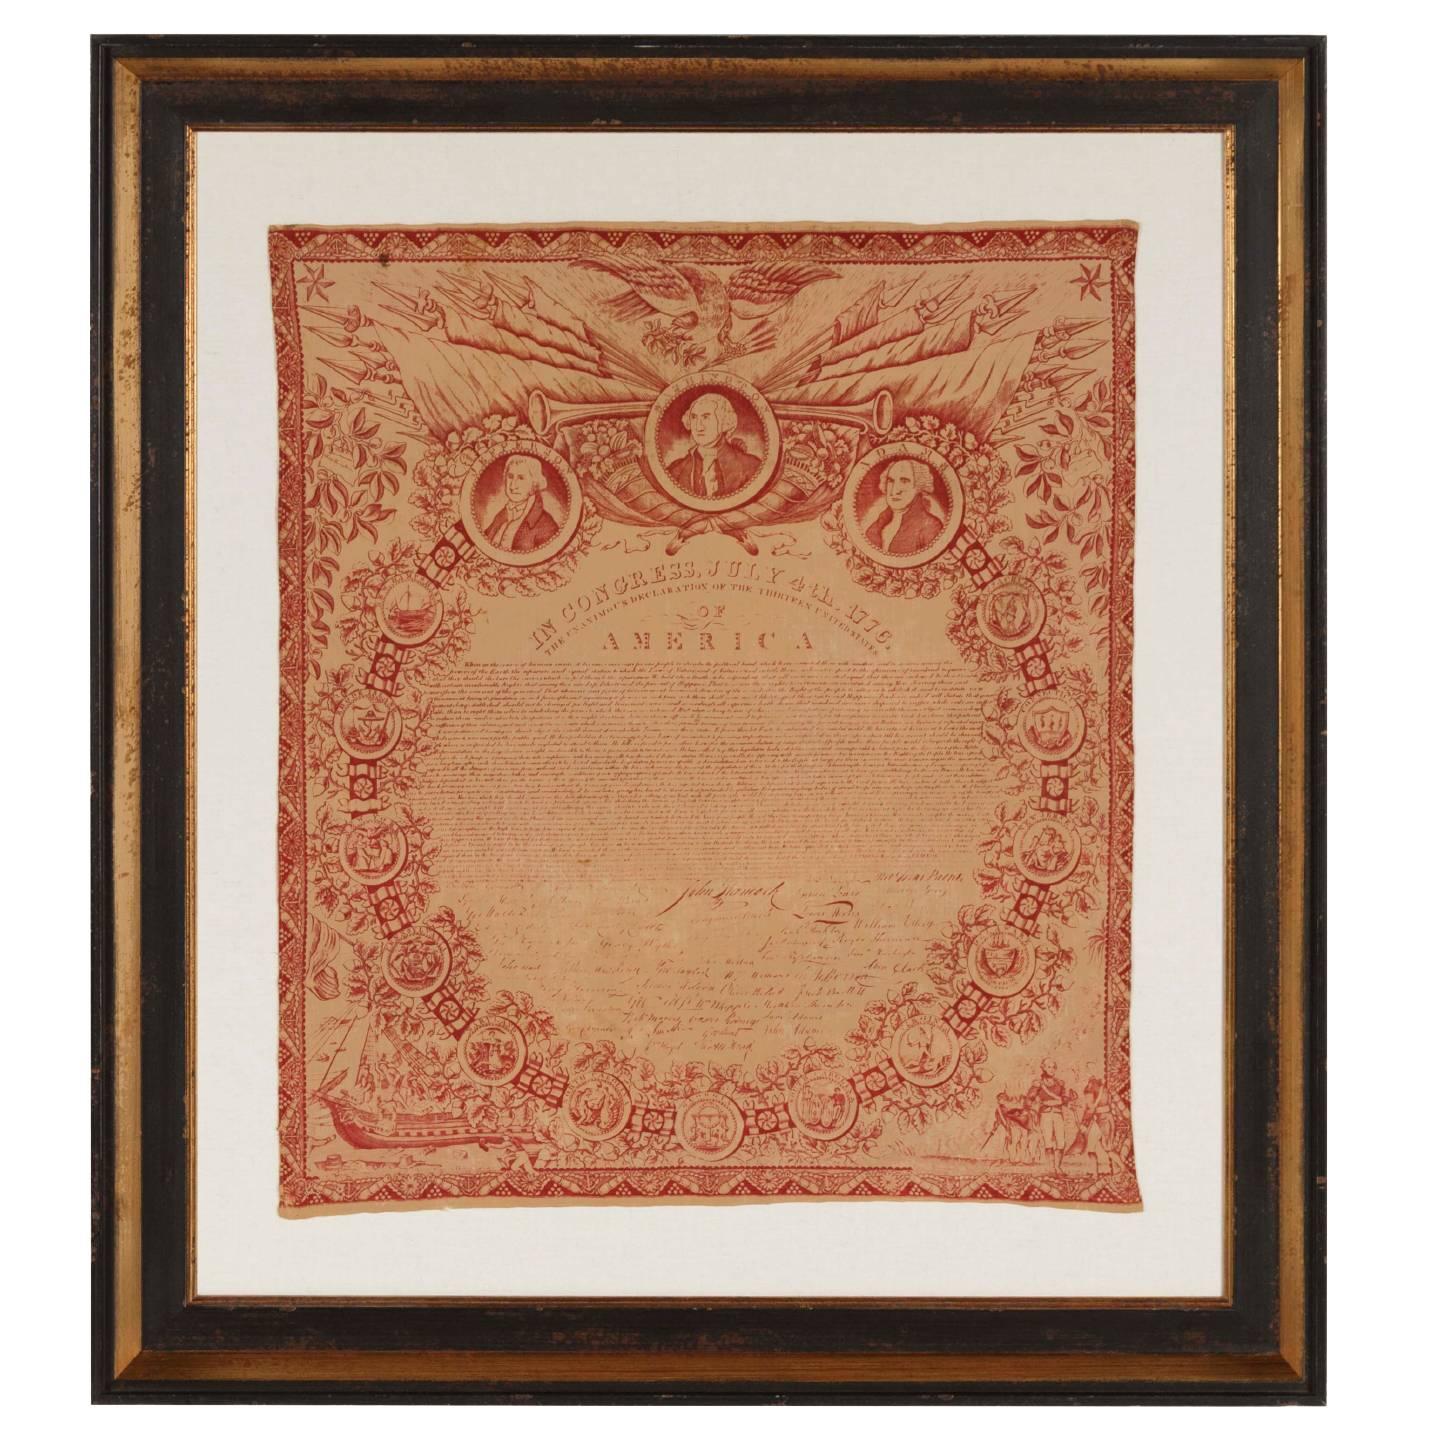 Exceptional 1821 Printing of the Declaration of Independence on Cloth